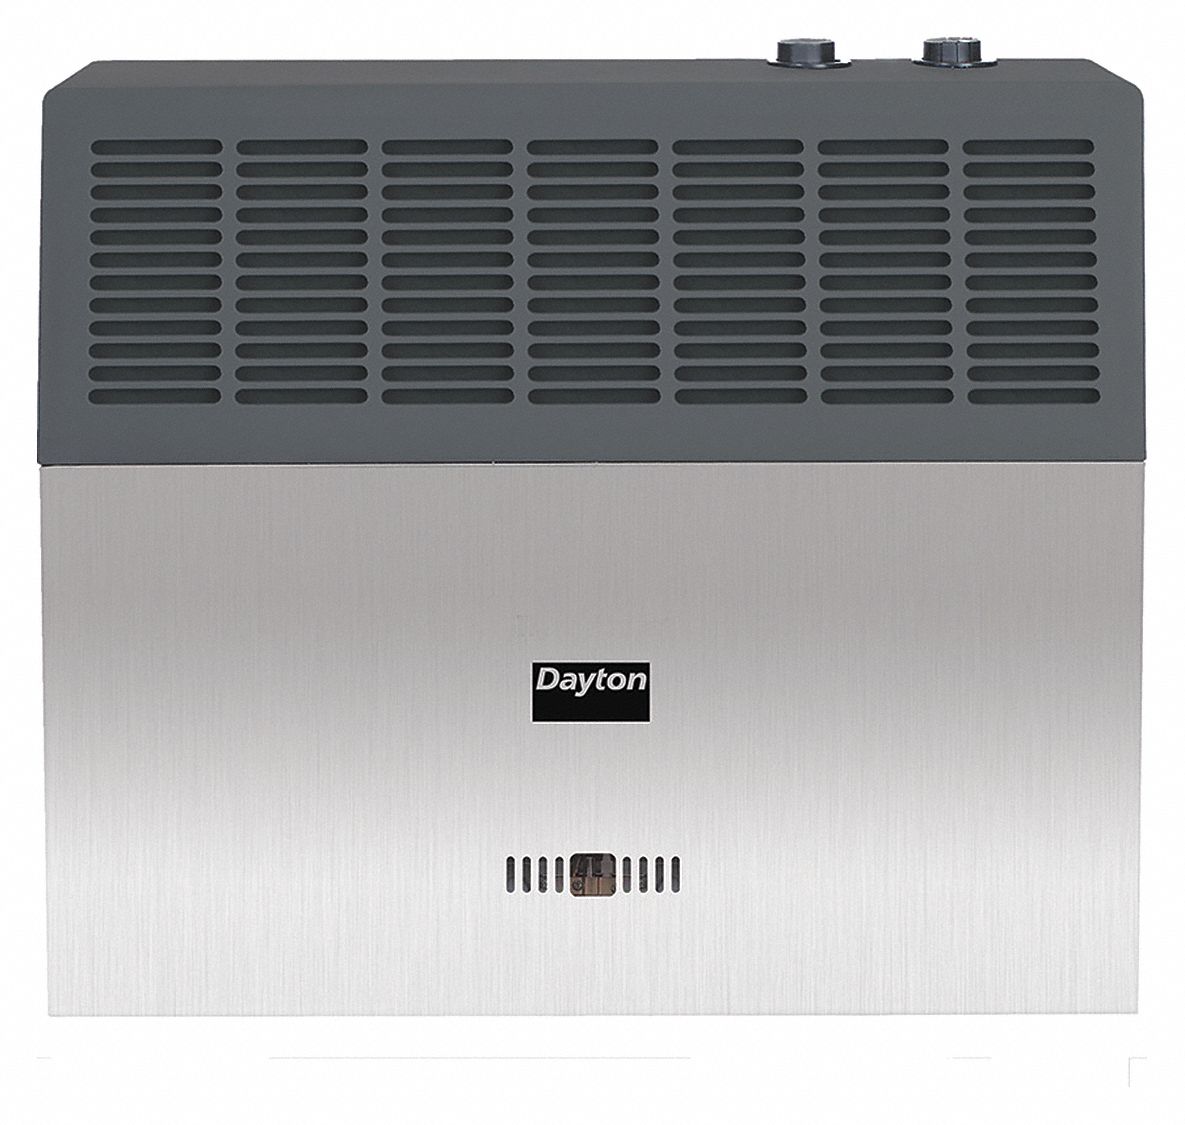 Dayton 7 7 8 In X 27 5 8 In X 25 In Gas Wall Heater With 1 100 Sq Ft Heating Area 12h993 12h993 Grainger